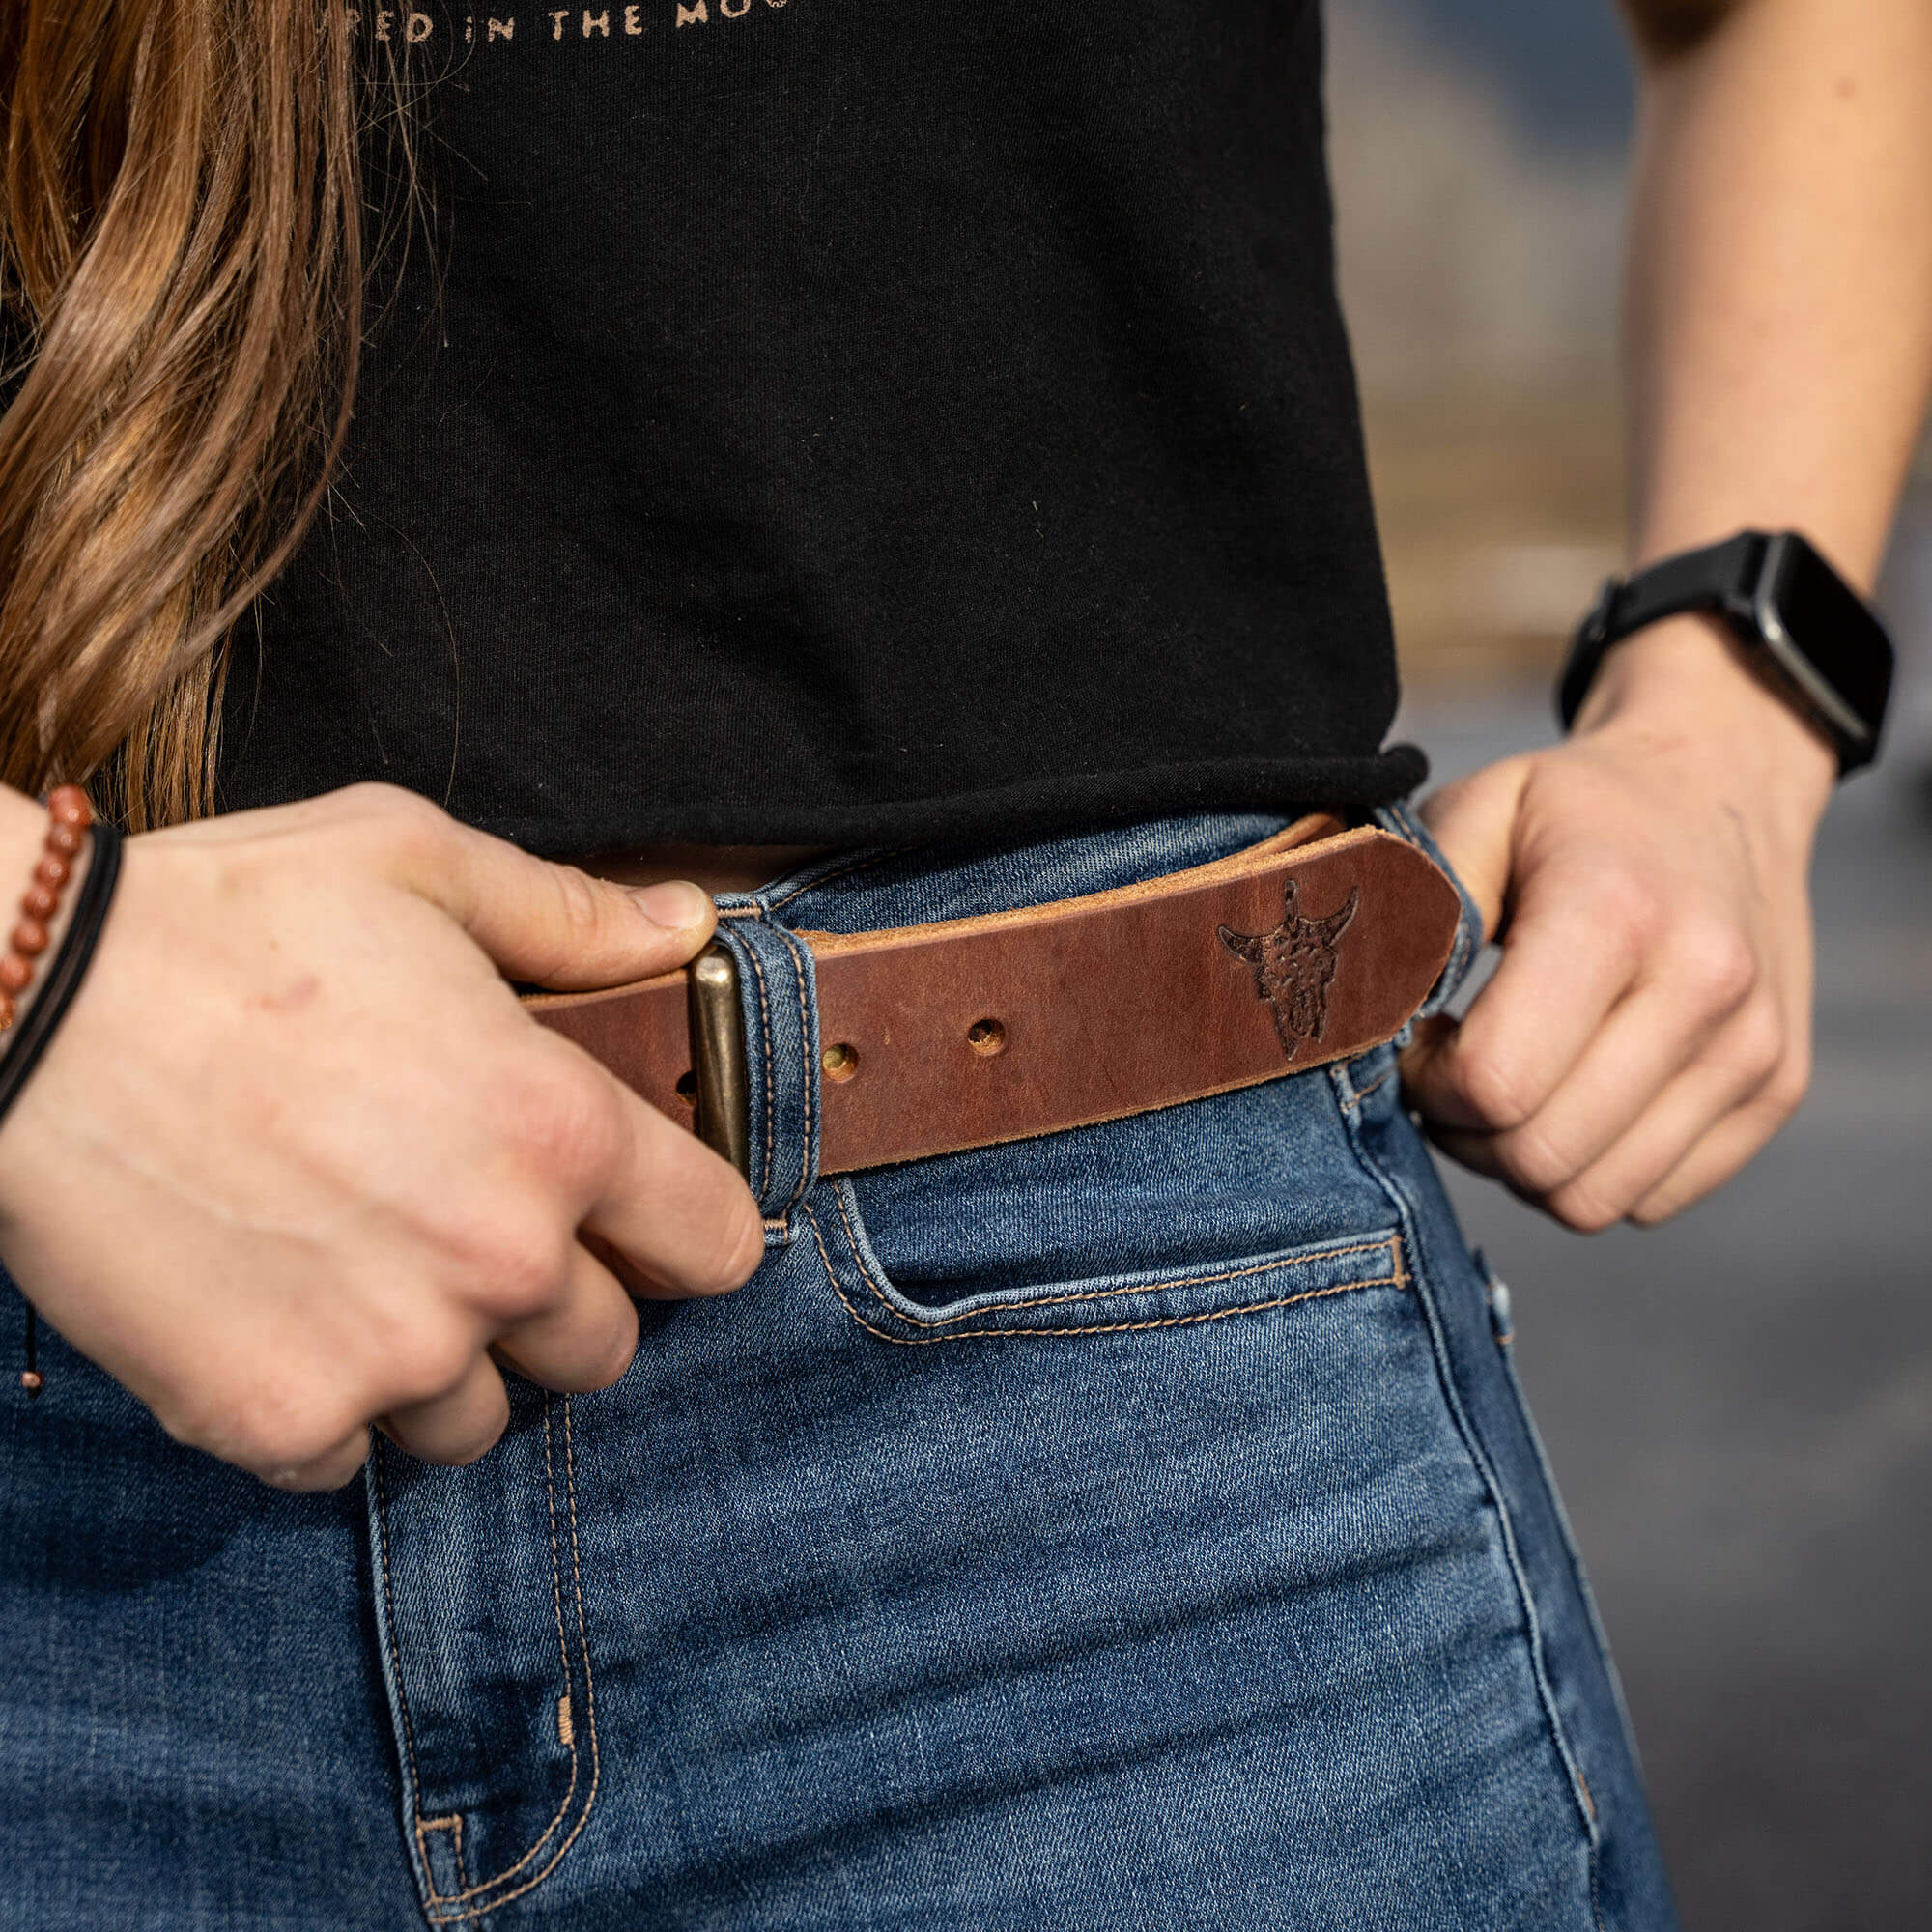 MKC LEATHER BELT - BROWN - USA MADE